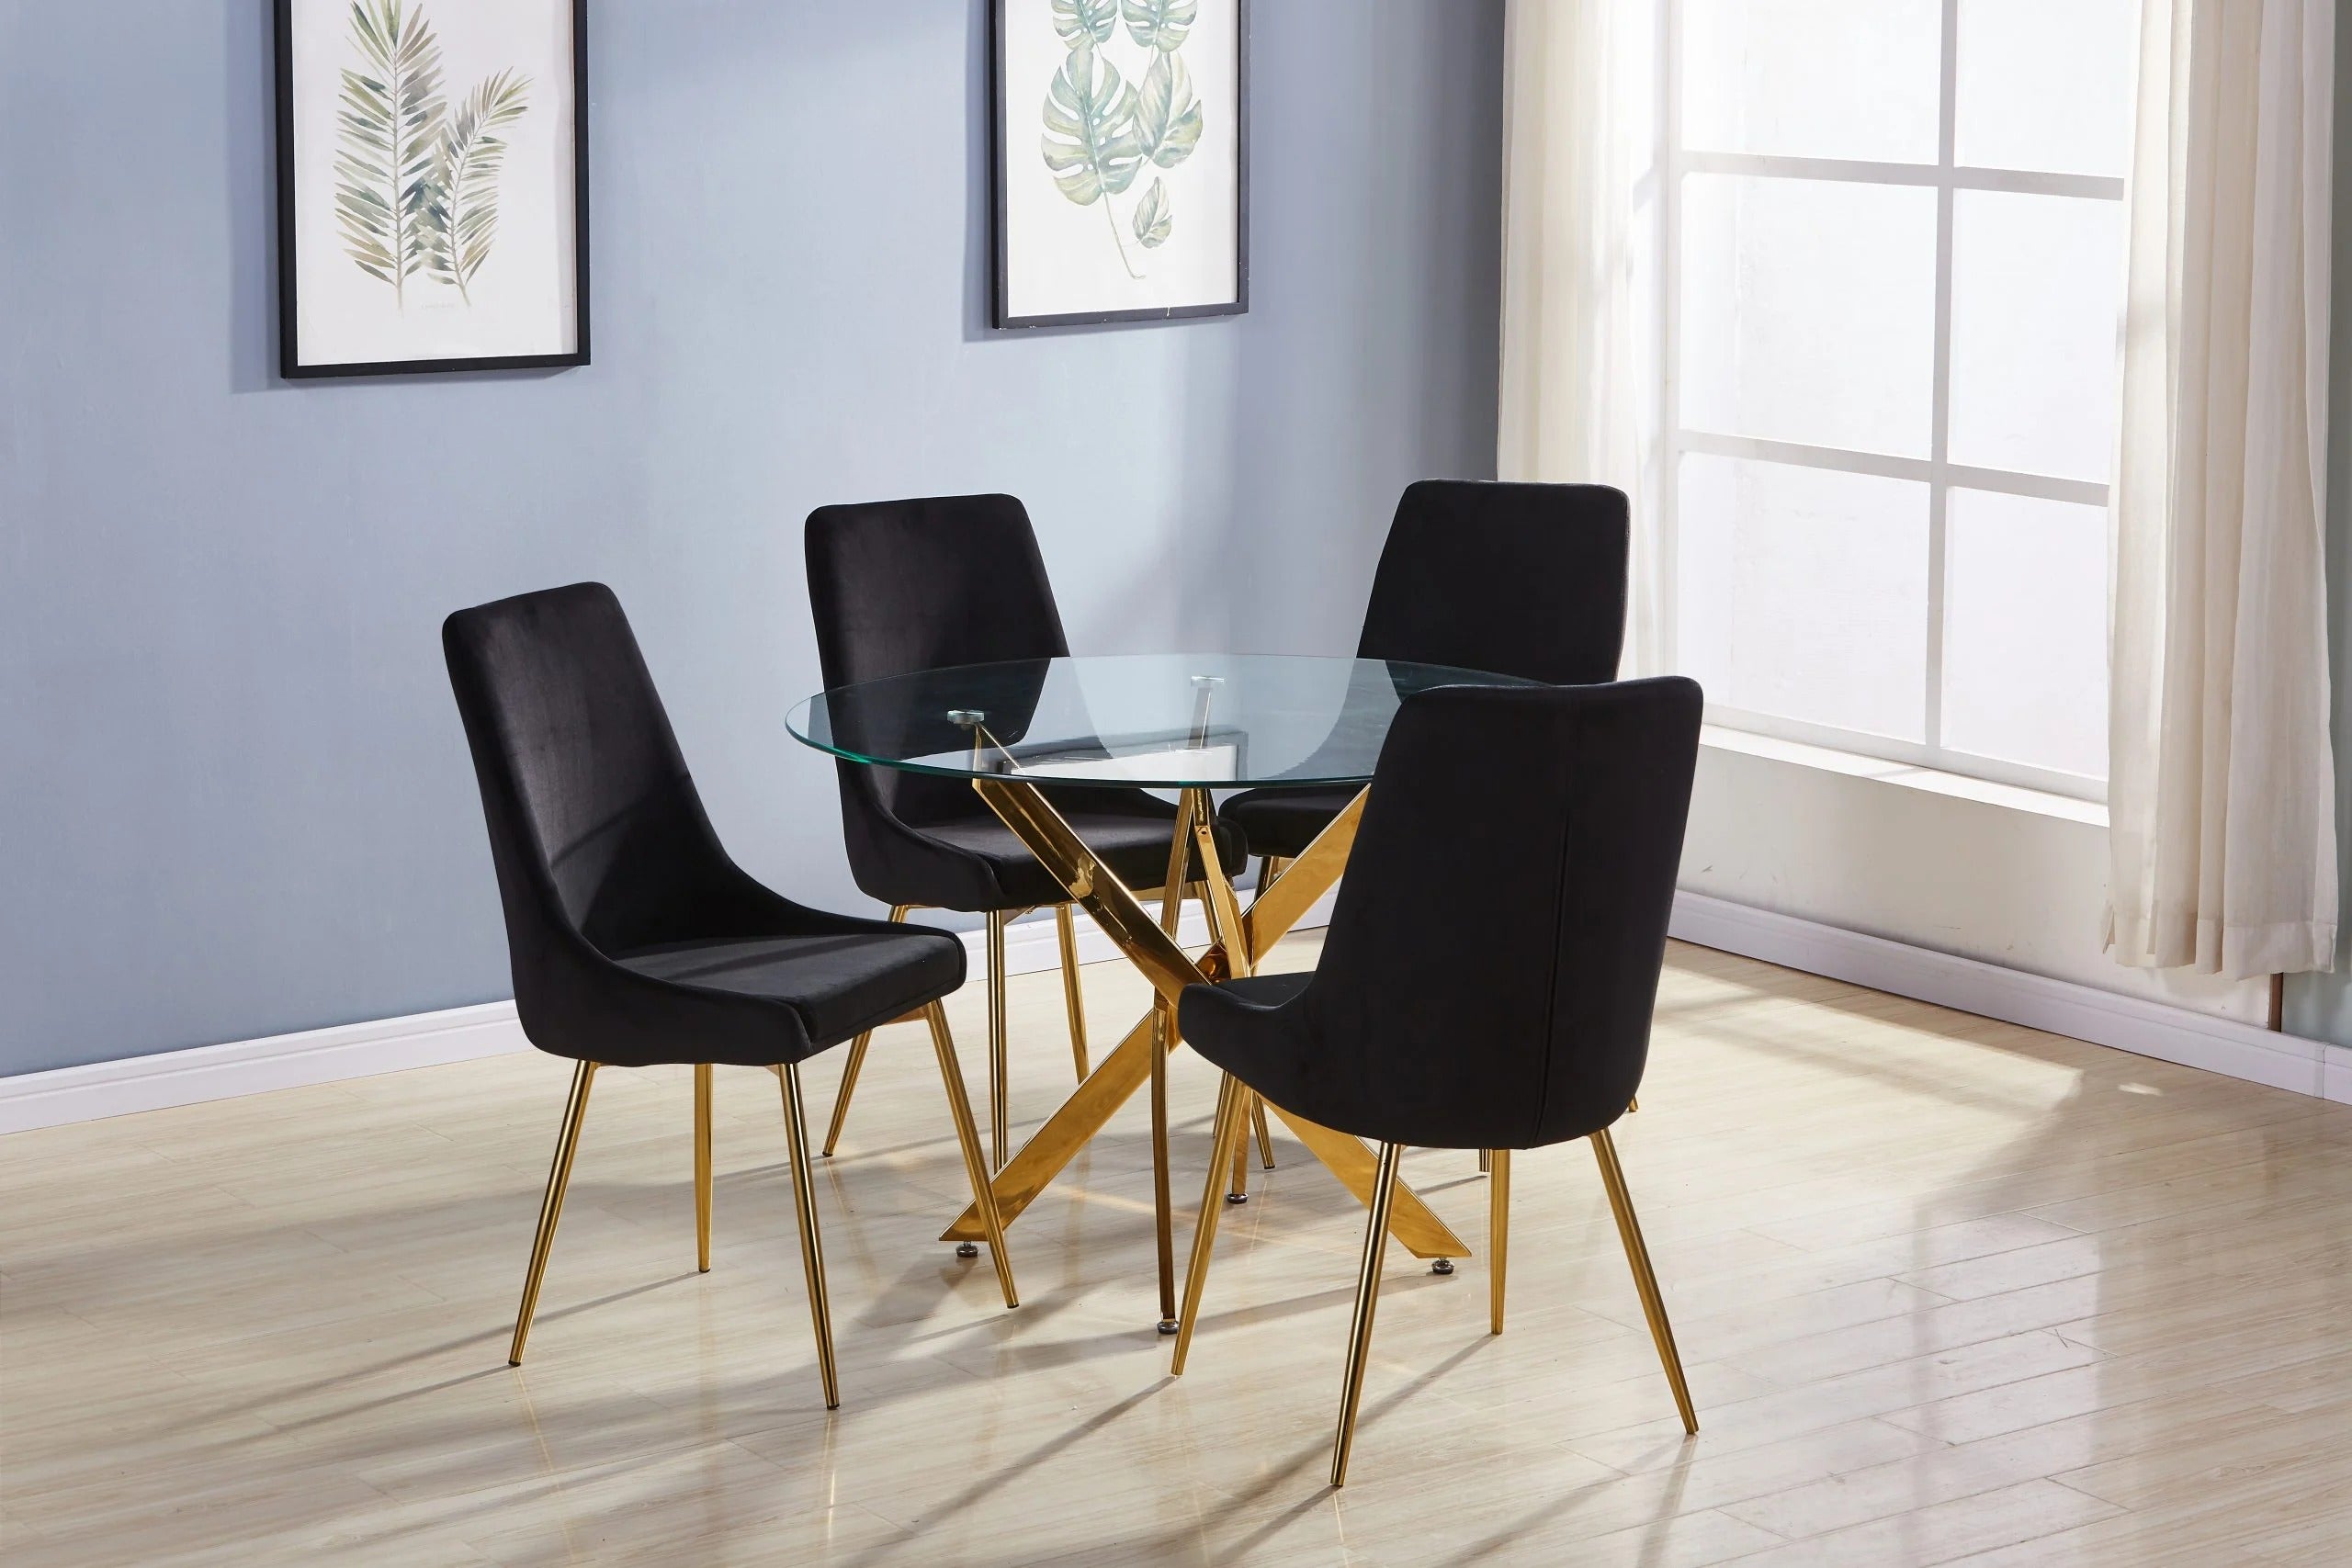 Round Gold Leg Dining Table with 4 Black Chairs